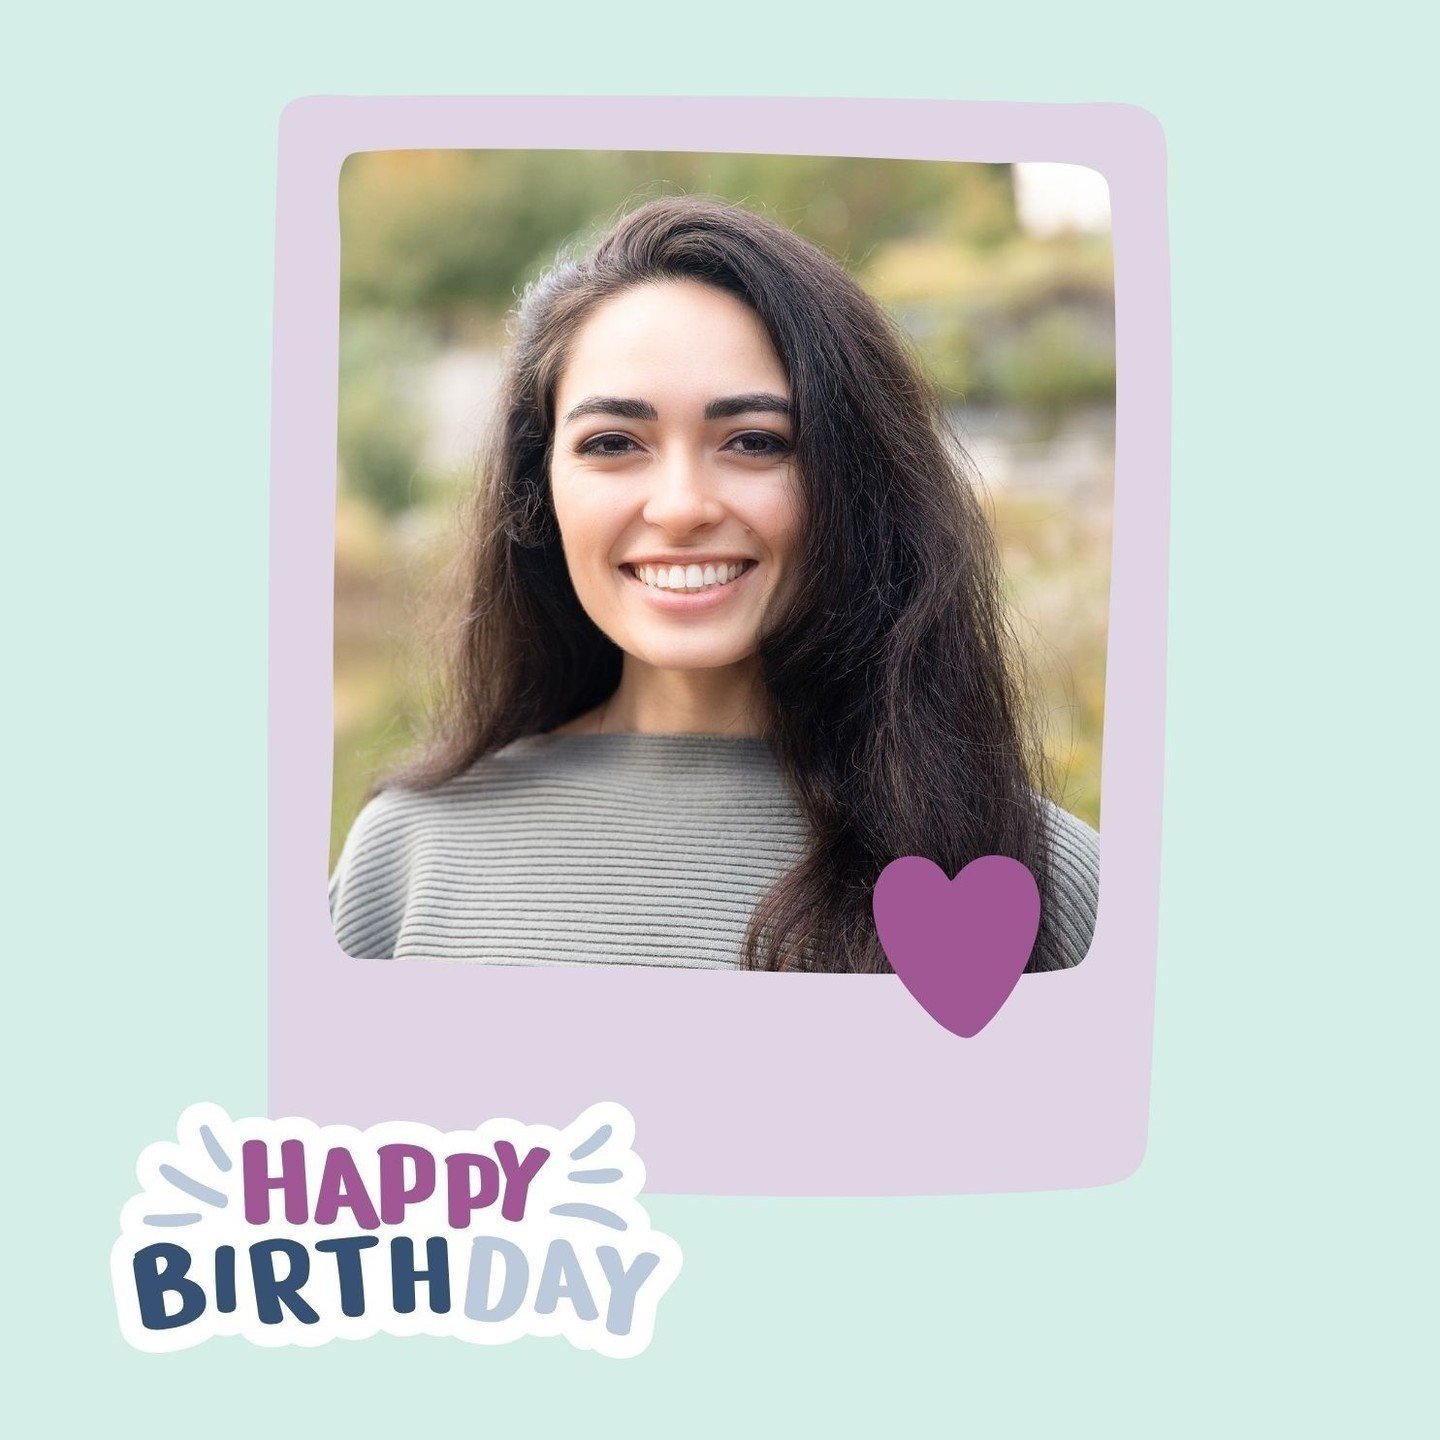 Please help us wish a happy birthday to Inner Balance therapist, Danielle Jeraci! Danielle, thanks for always being a team player &amp; for shining so brightly. We're very grateful that you are a part of the Inner Balance family!